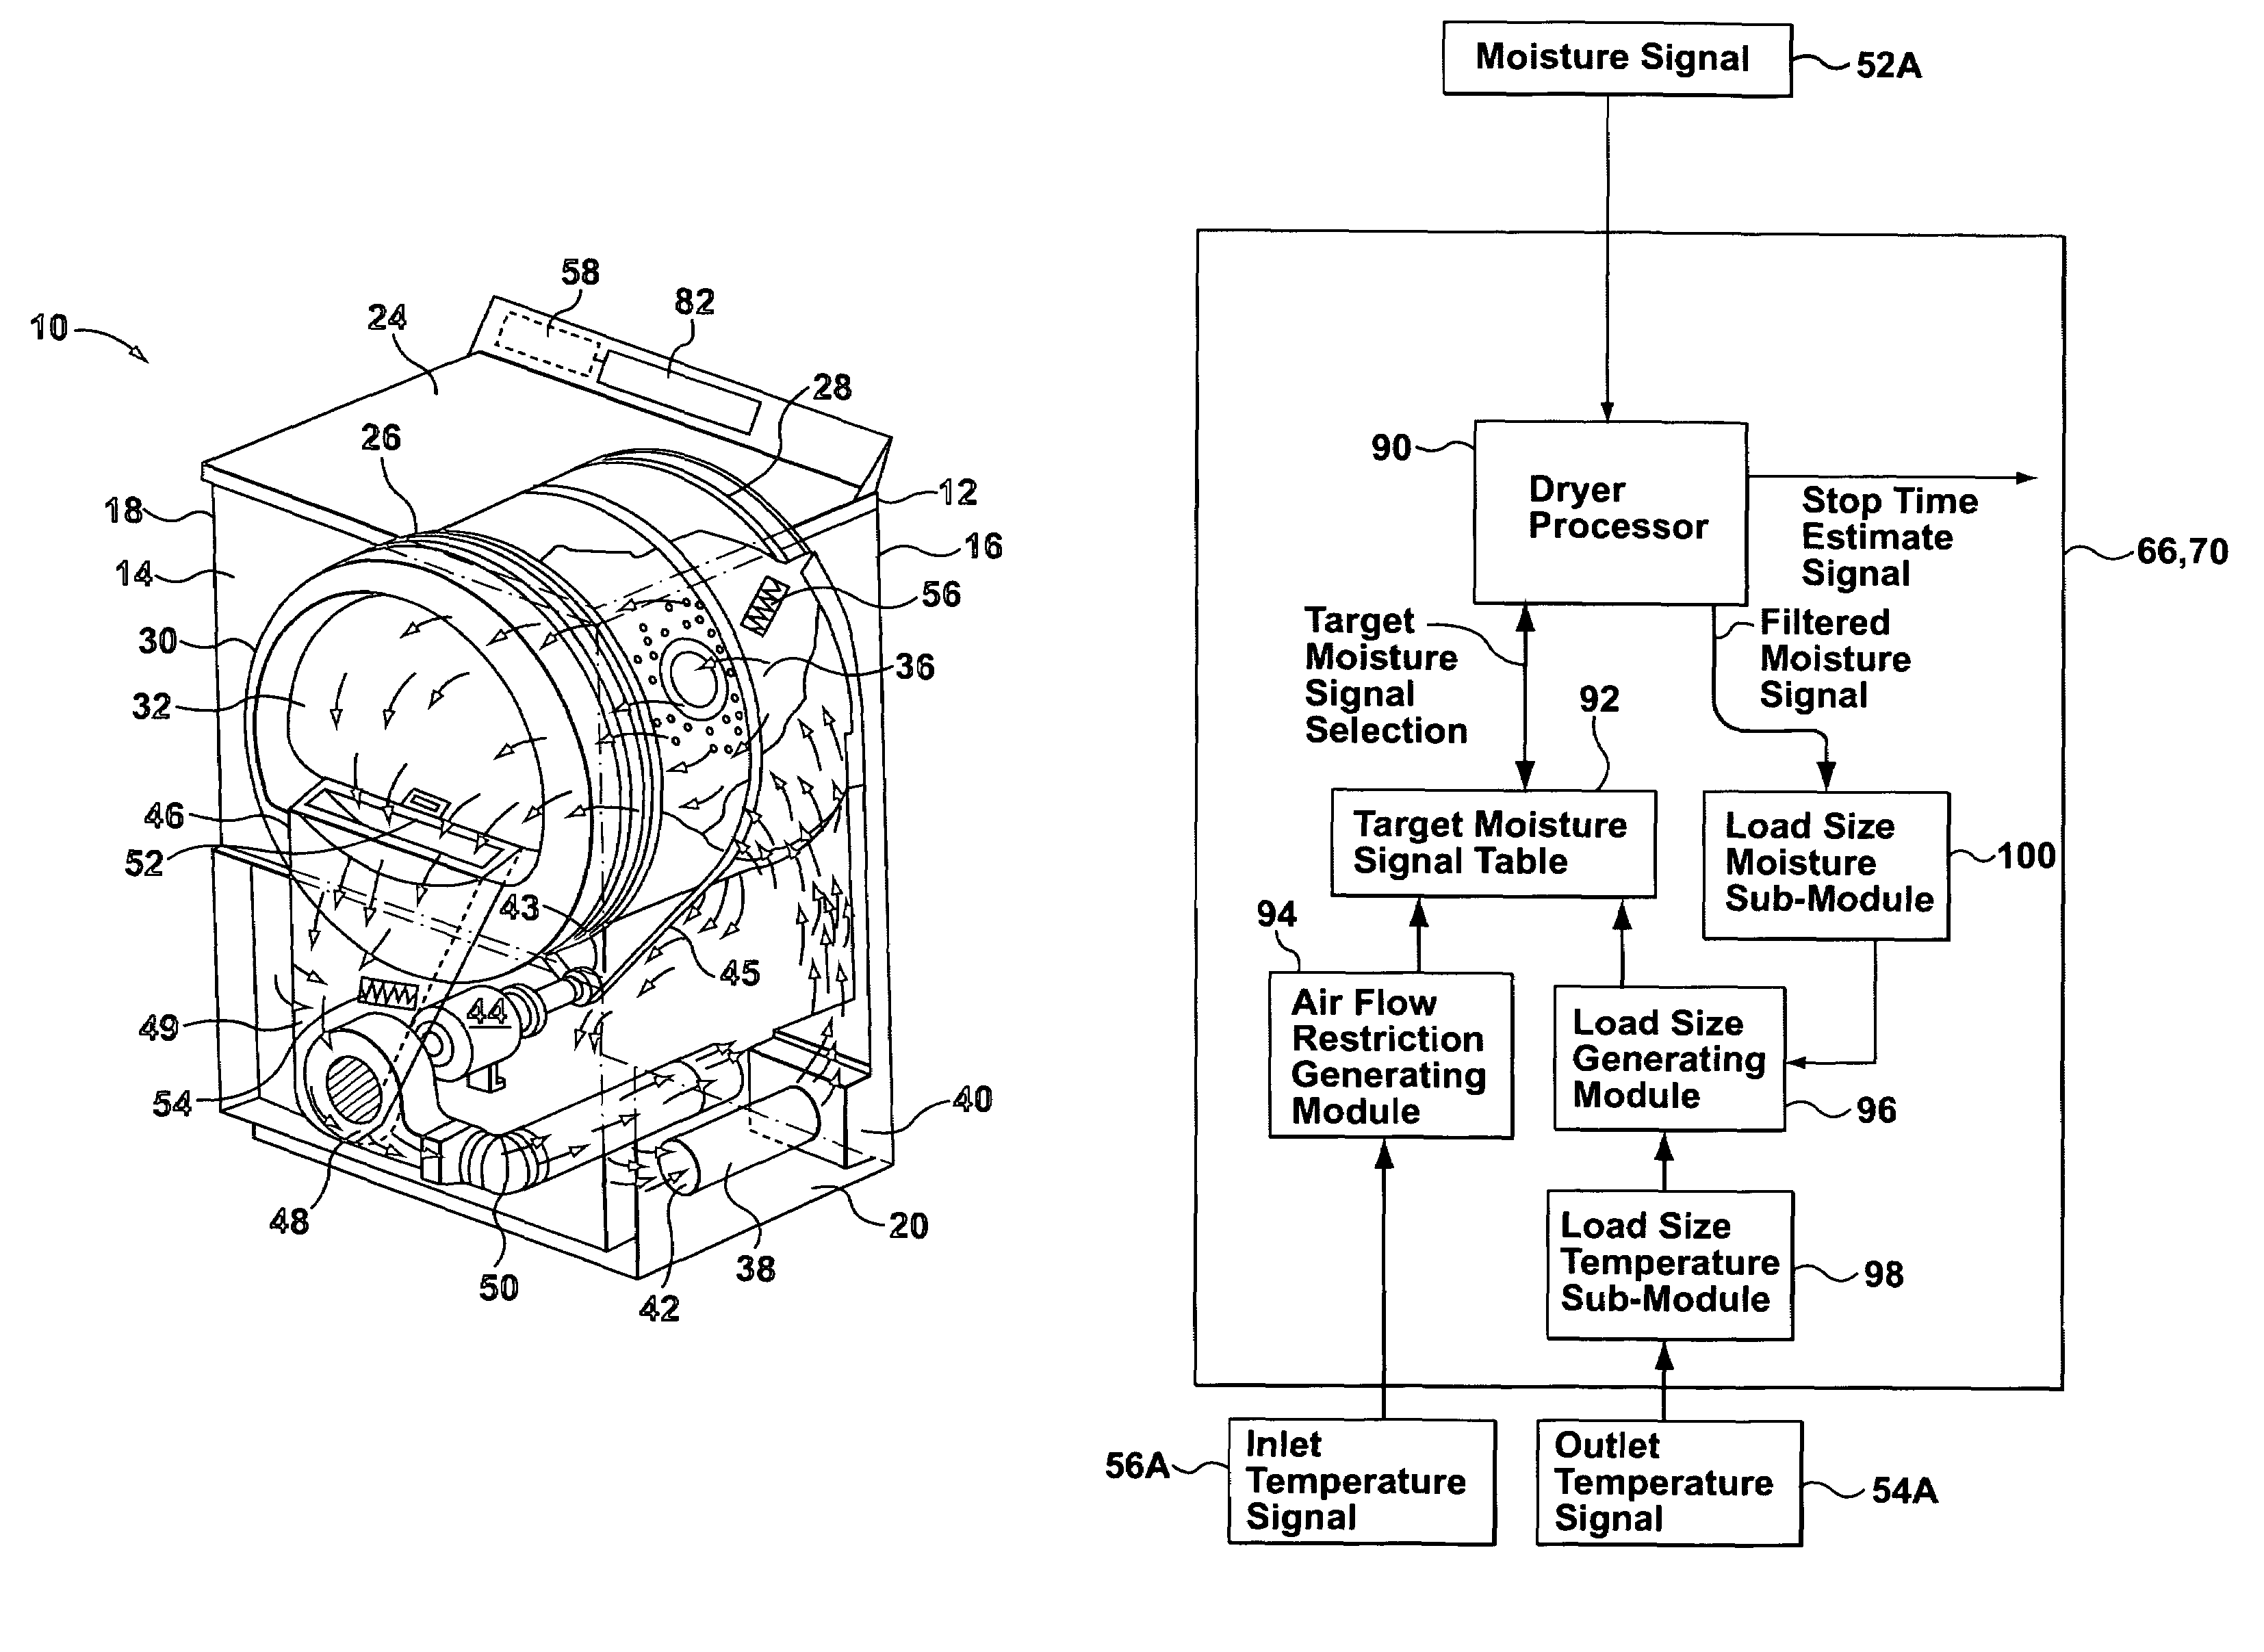 Apparatus and method for controlling a clothes dryer